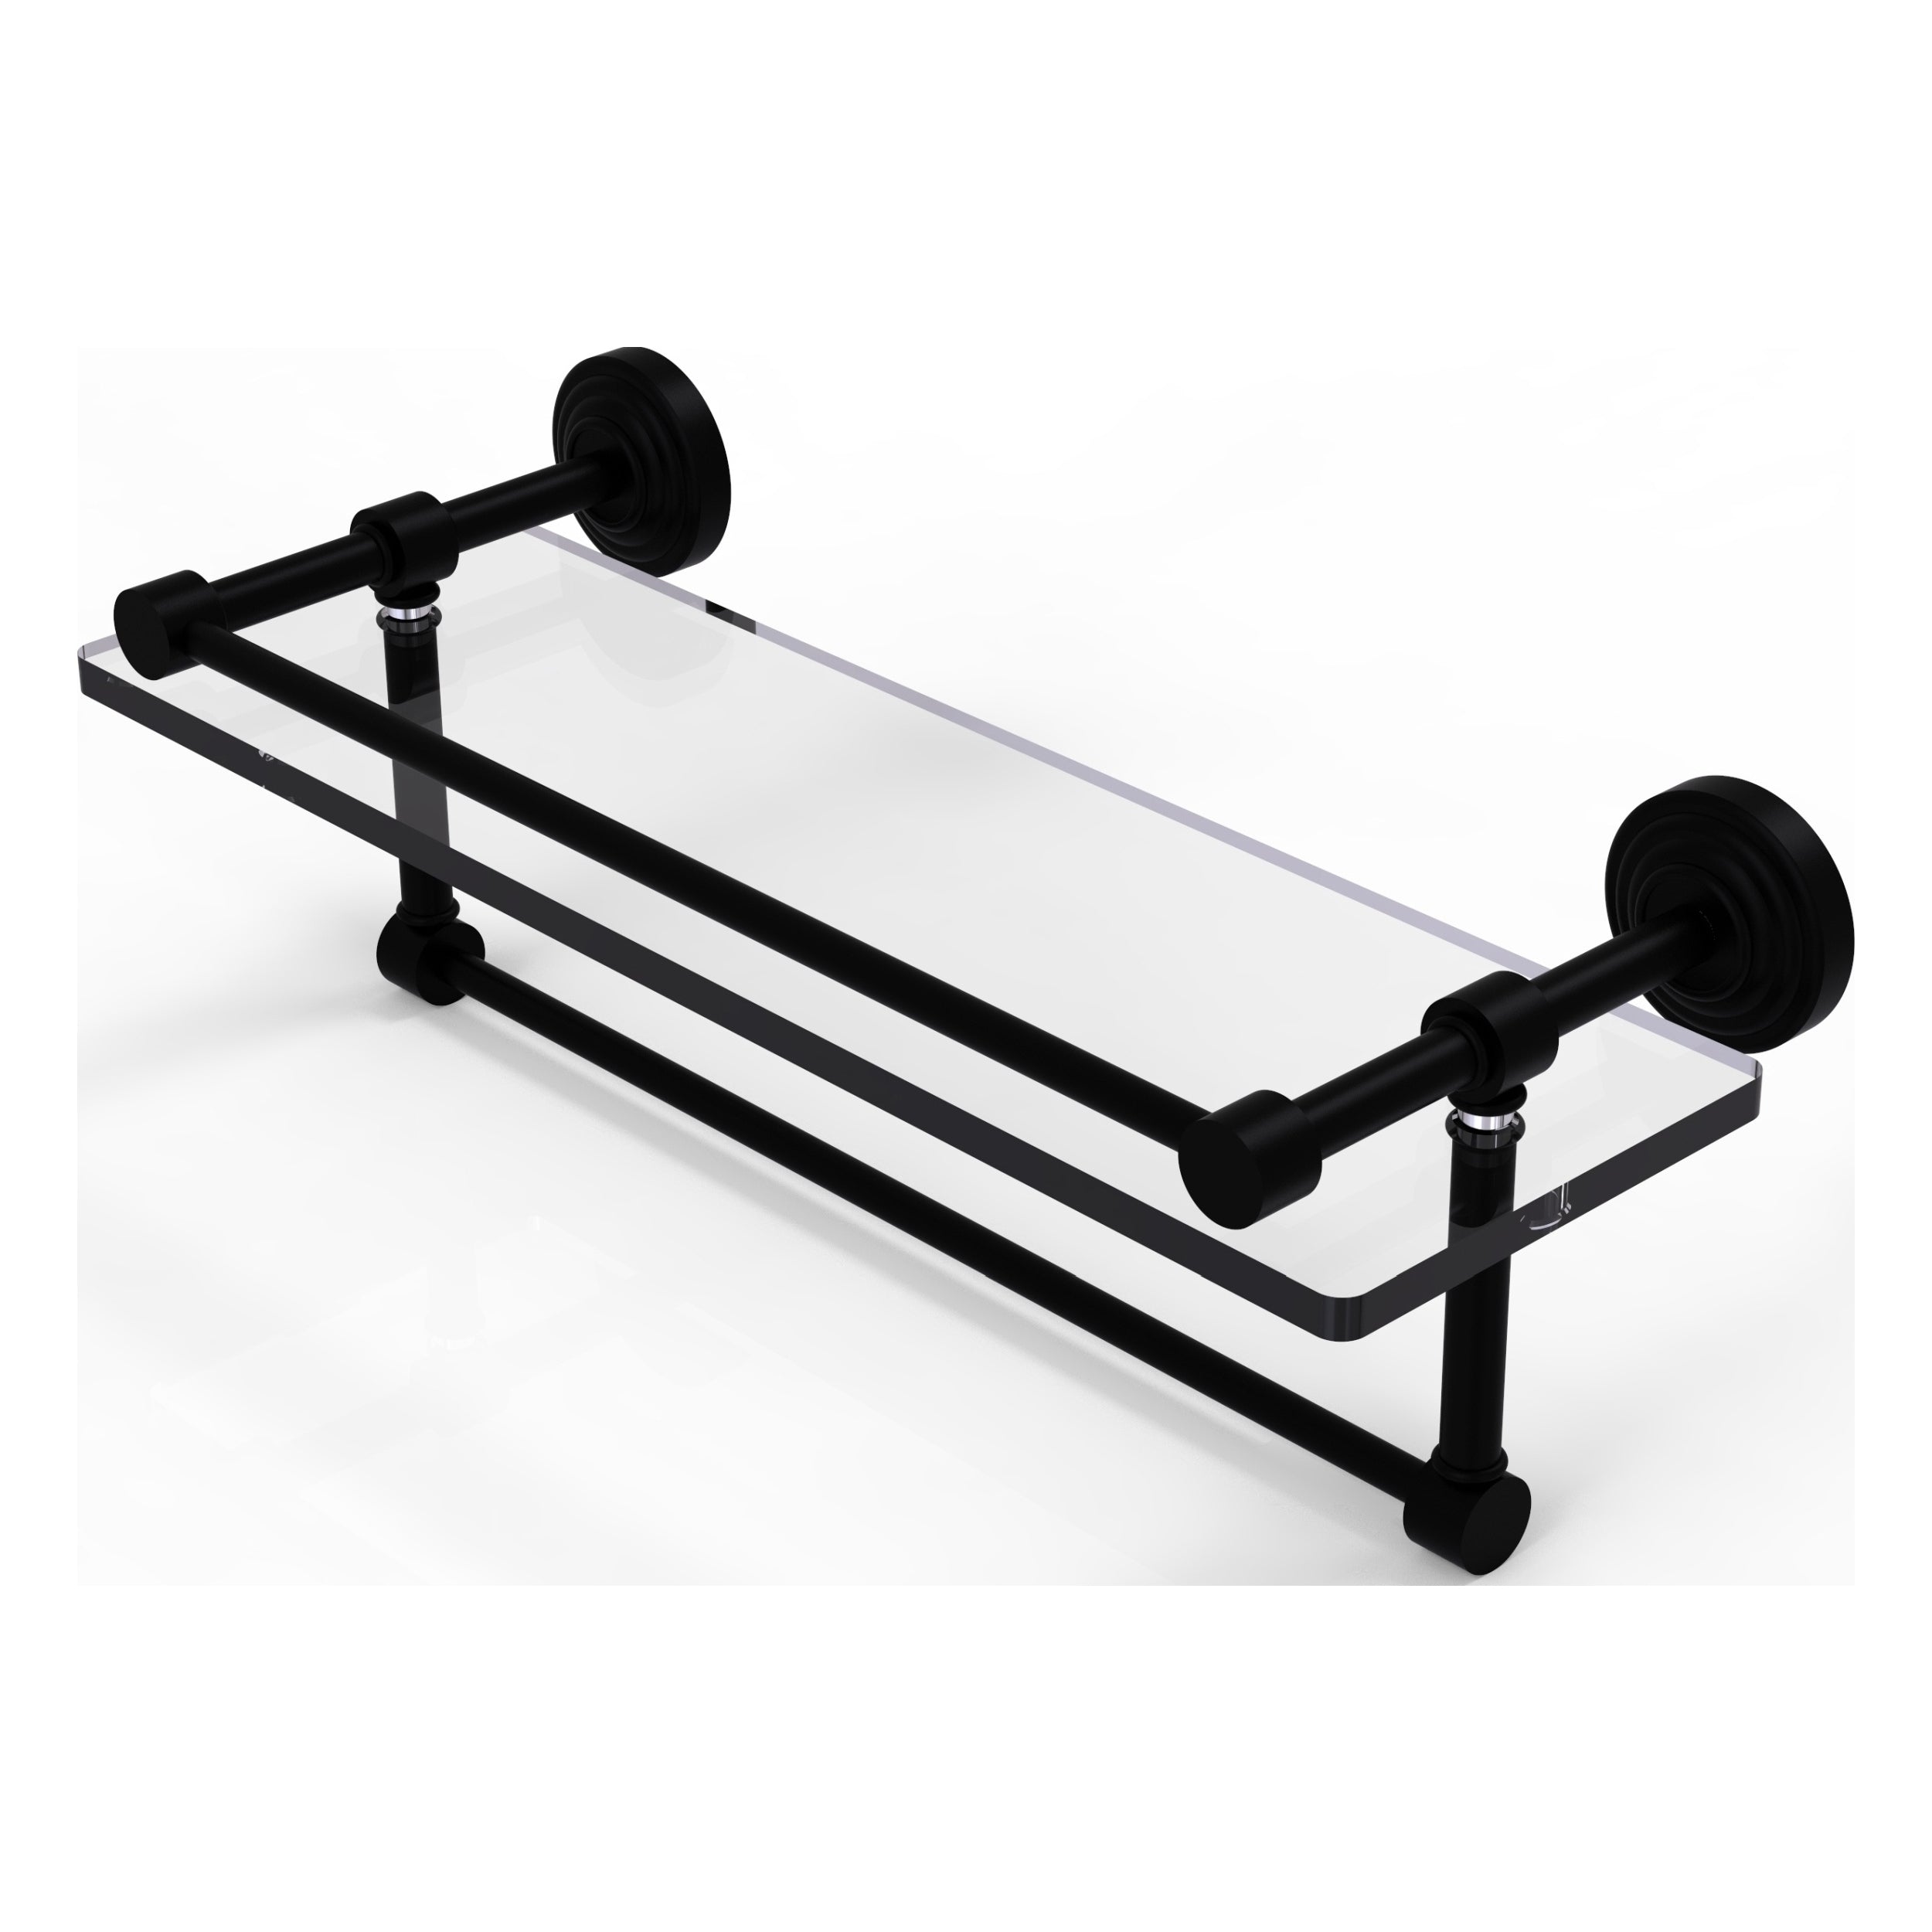 16-in Gallery Glass Shelf with Towel Bar in Matte Black - image 1 of 2